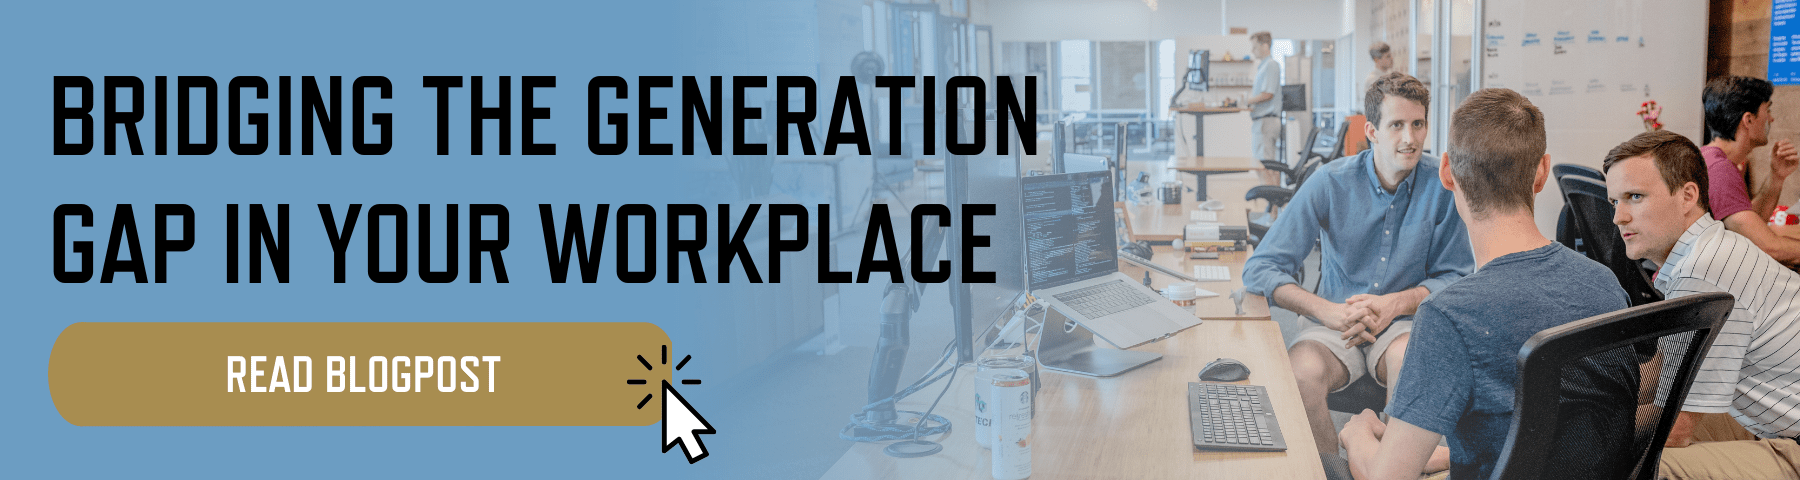 Bridging the generation gap in your workplace